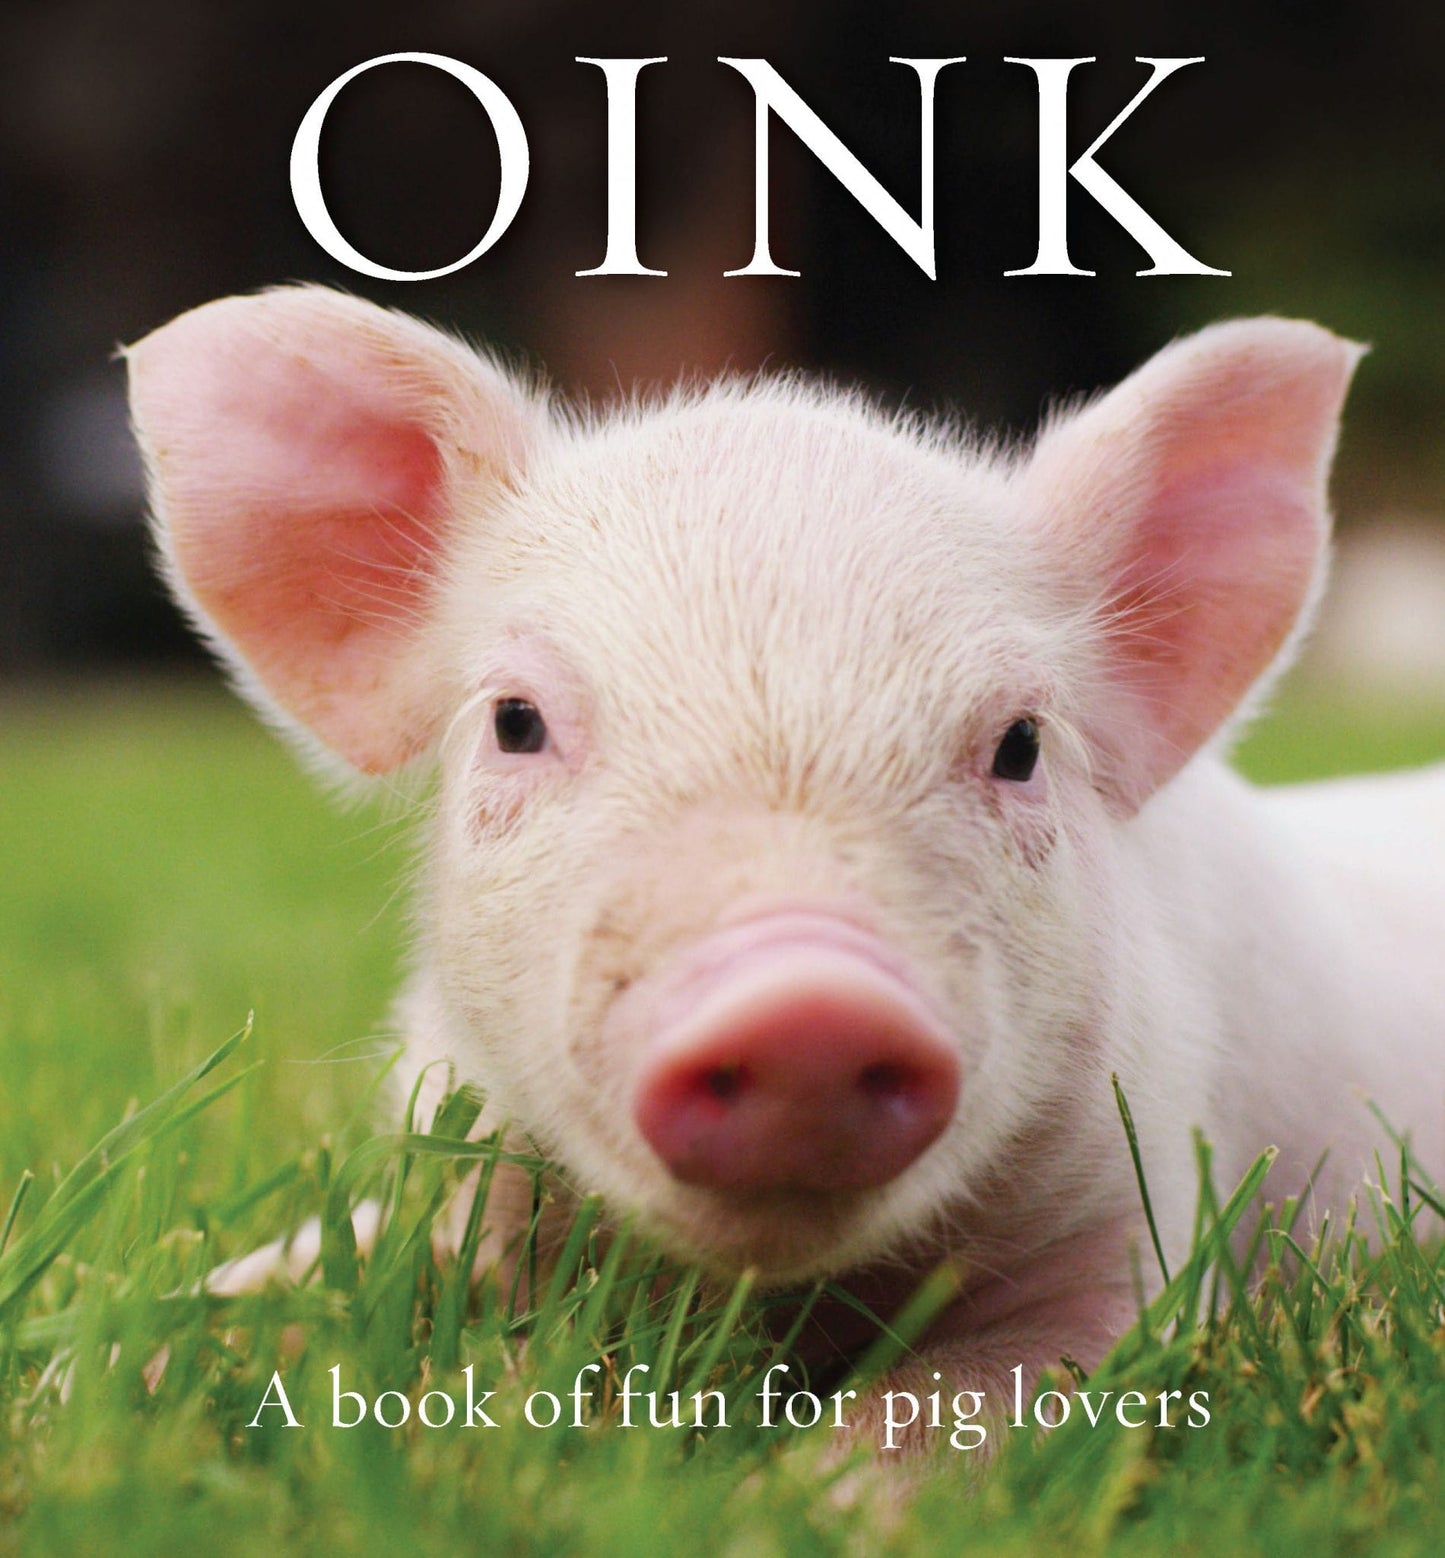 Oink: A book of fun for pig lovers